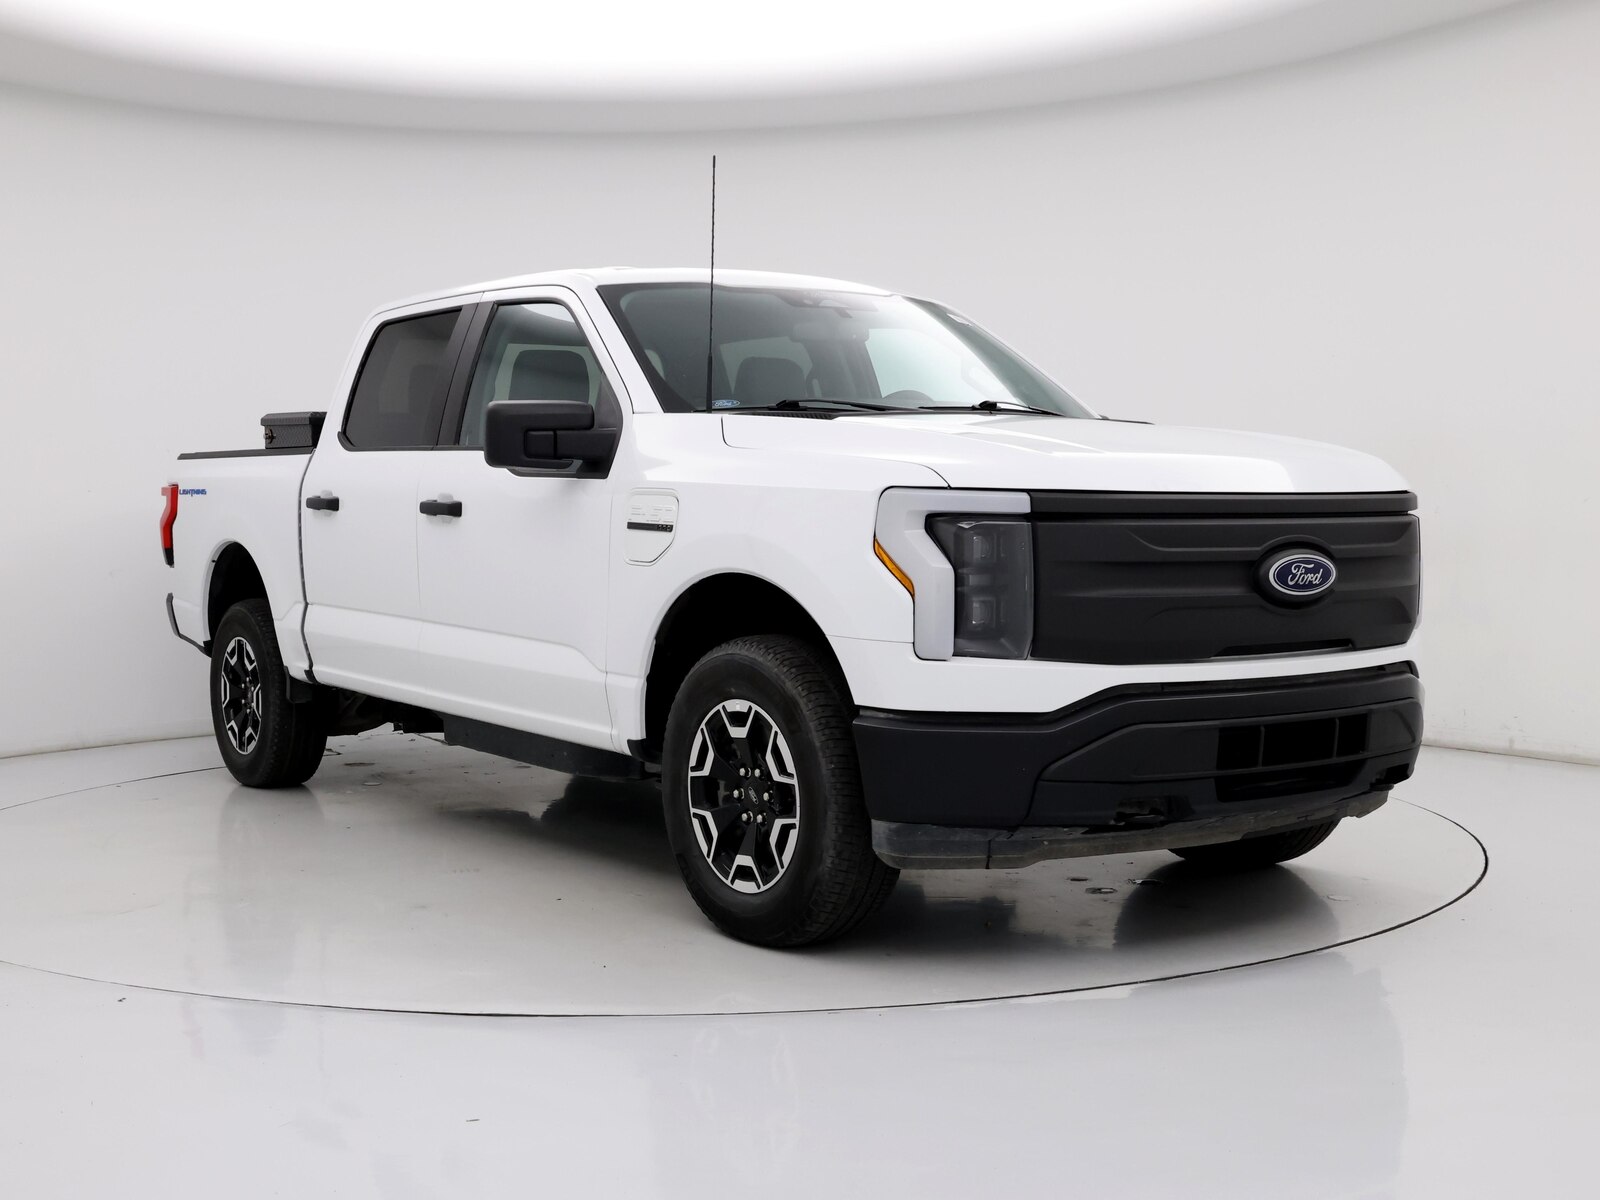 Used 2022 Ford F-150 Lightning Pro with VIN 1FTVW1EL1NWG05114 for sale in Kenosha, WI